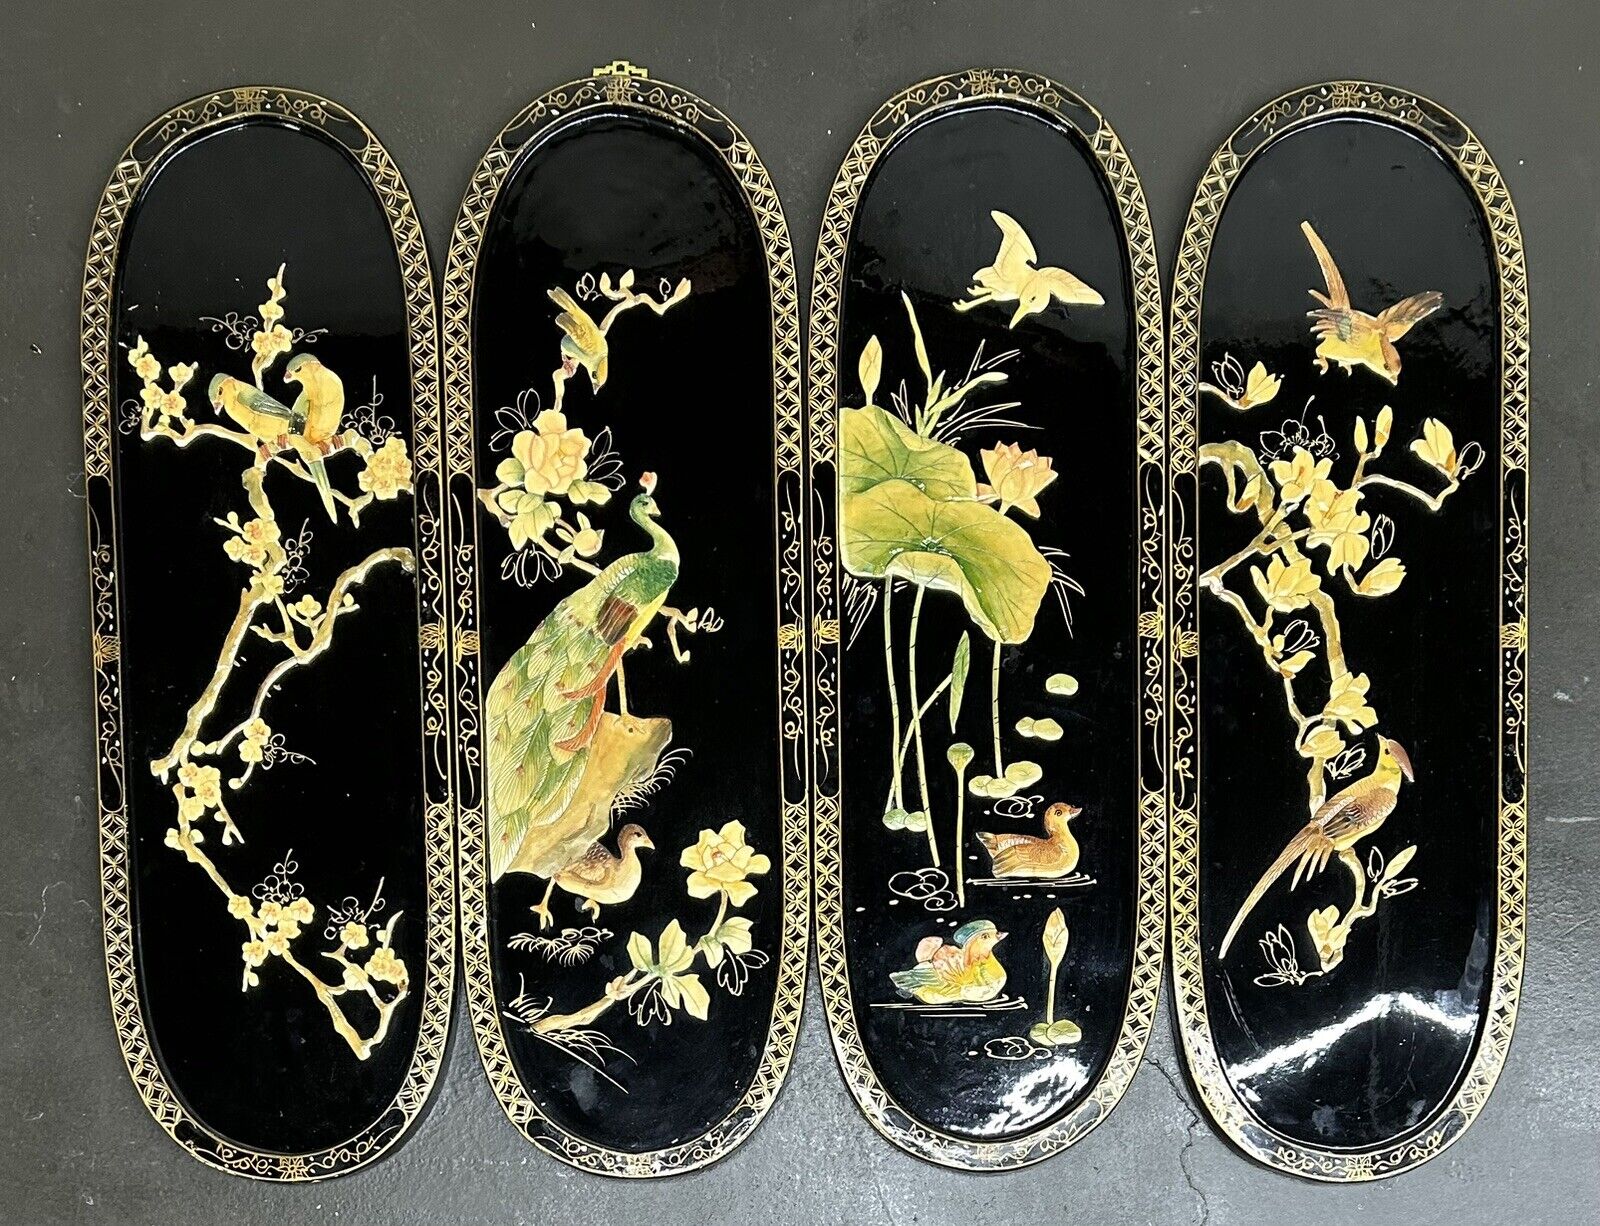 4 VTG Oriental Mother of Pearl Black Lacquer Asian Wall Art Plaque Panels Birds